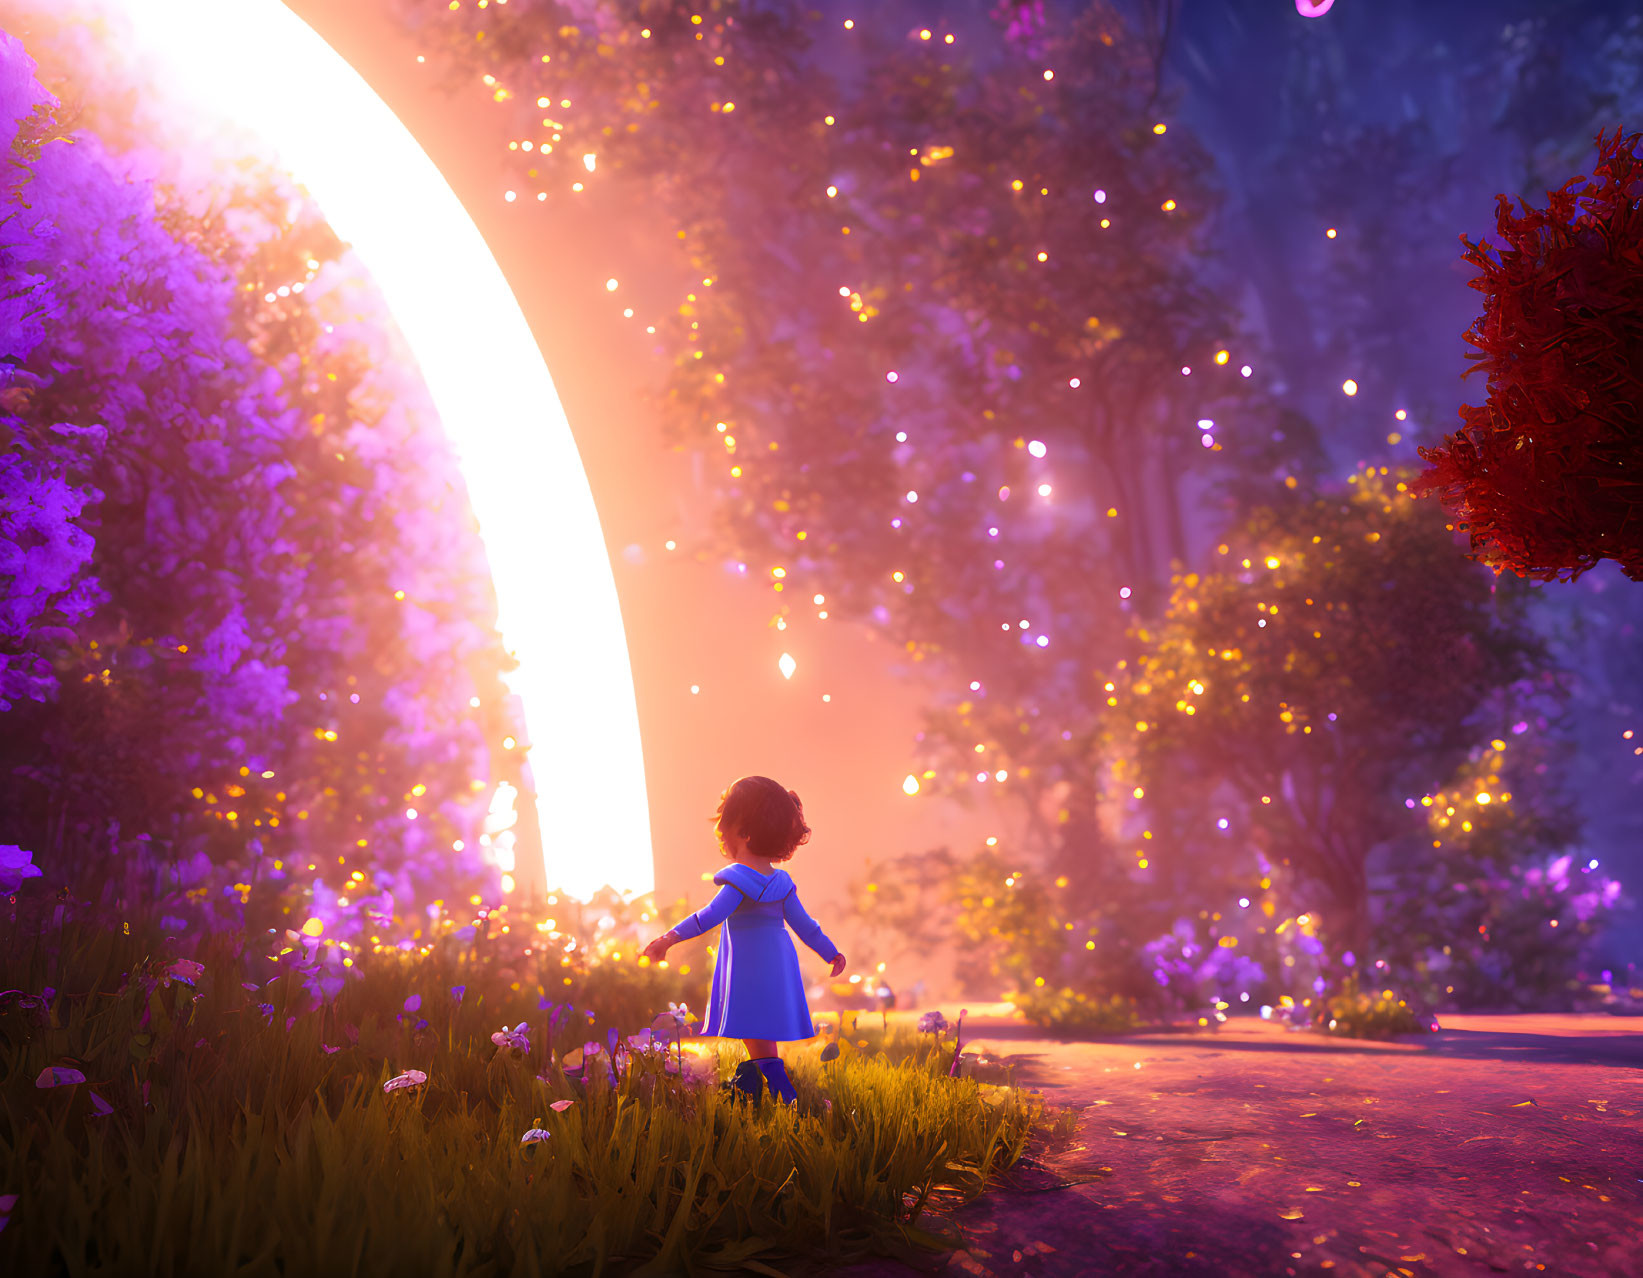 Child in Blue Outfit Observing Glowing Archway in Enchanting Forest